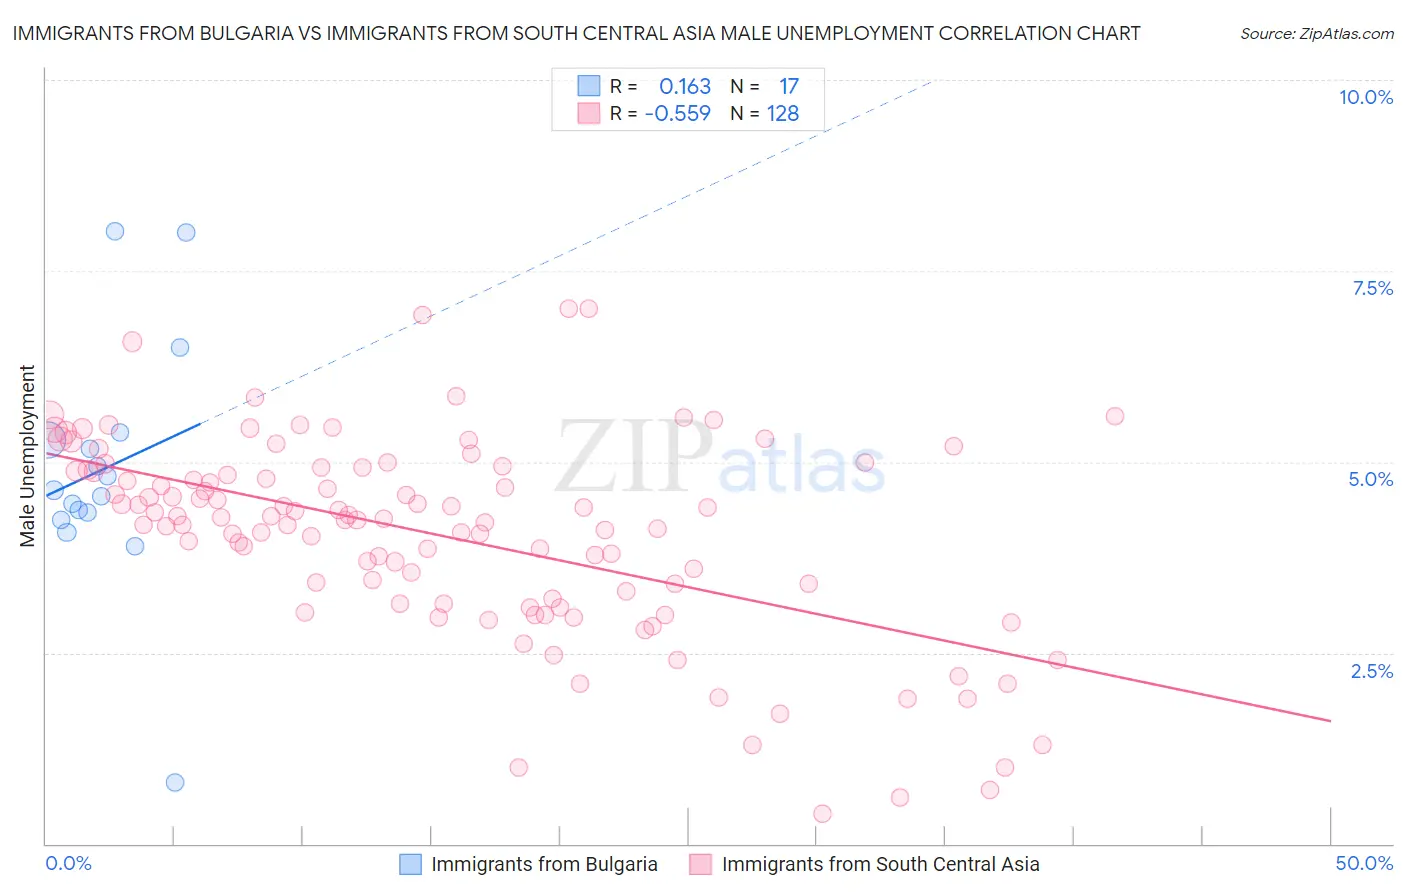 Immigrants from Bulgaria vs Immigrants from South Central Asia Male Unemployment